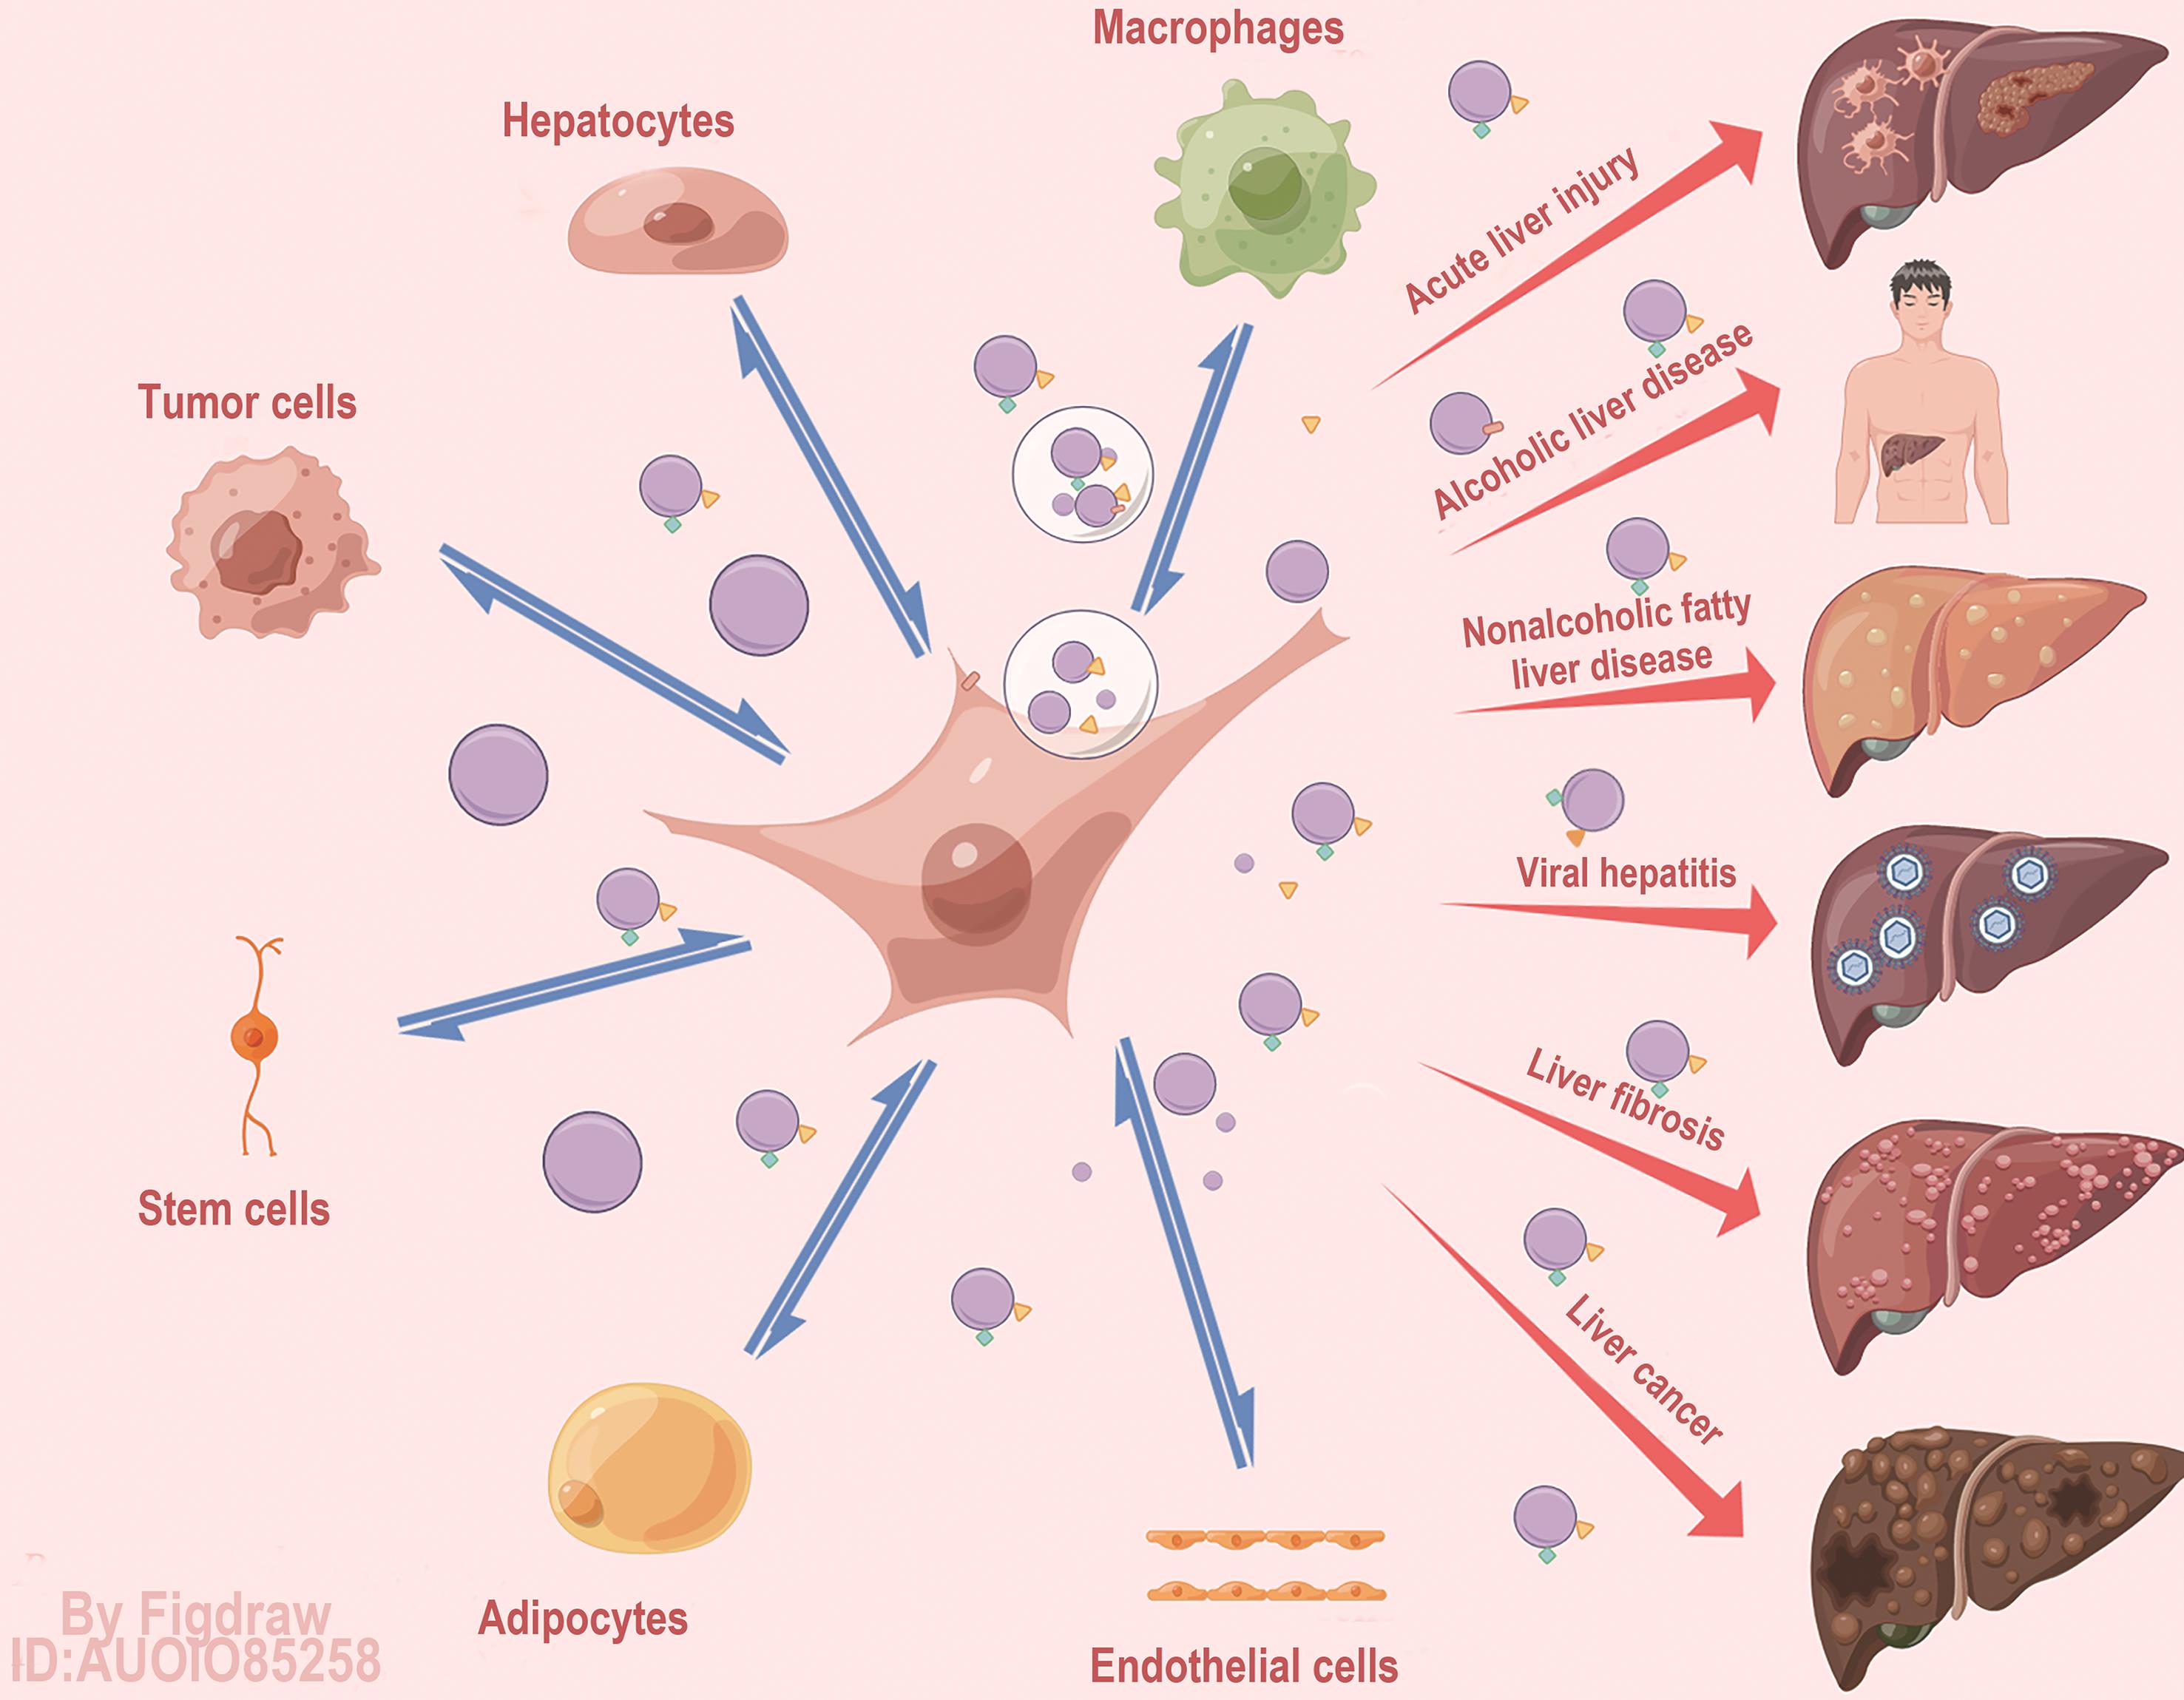 Brief summary of the roles of HSC-derived exosomes in liver diseases and involved molecules and signaling pathways.